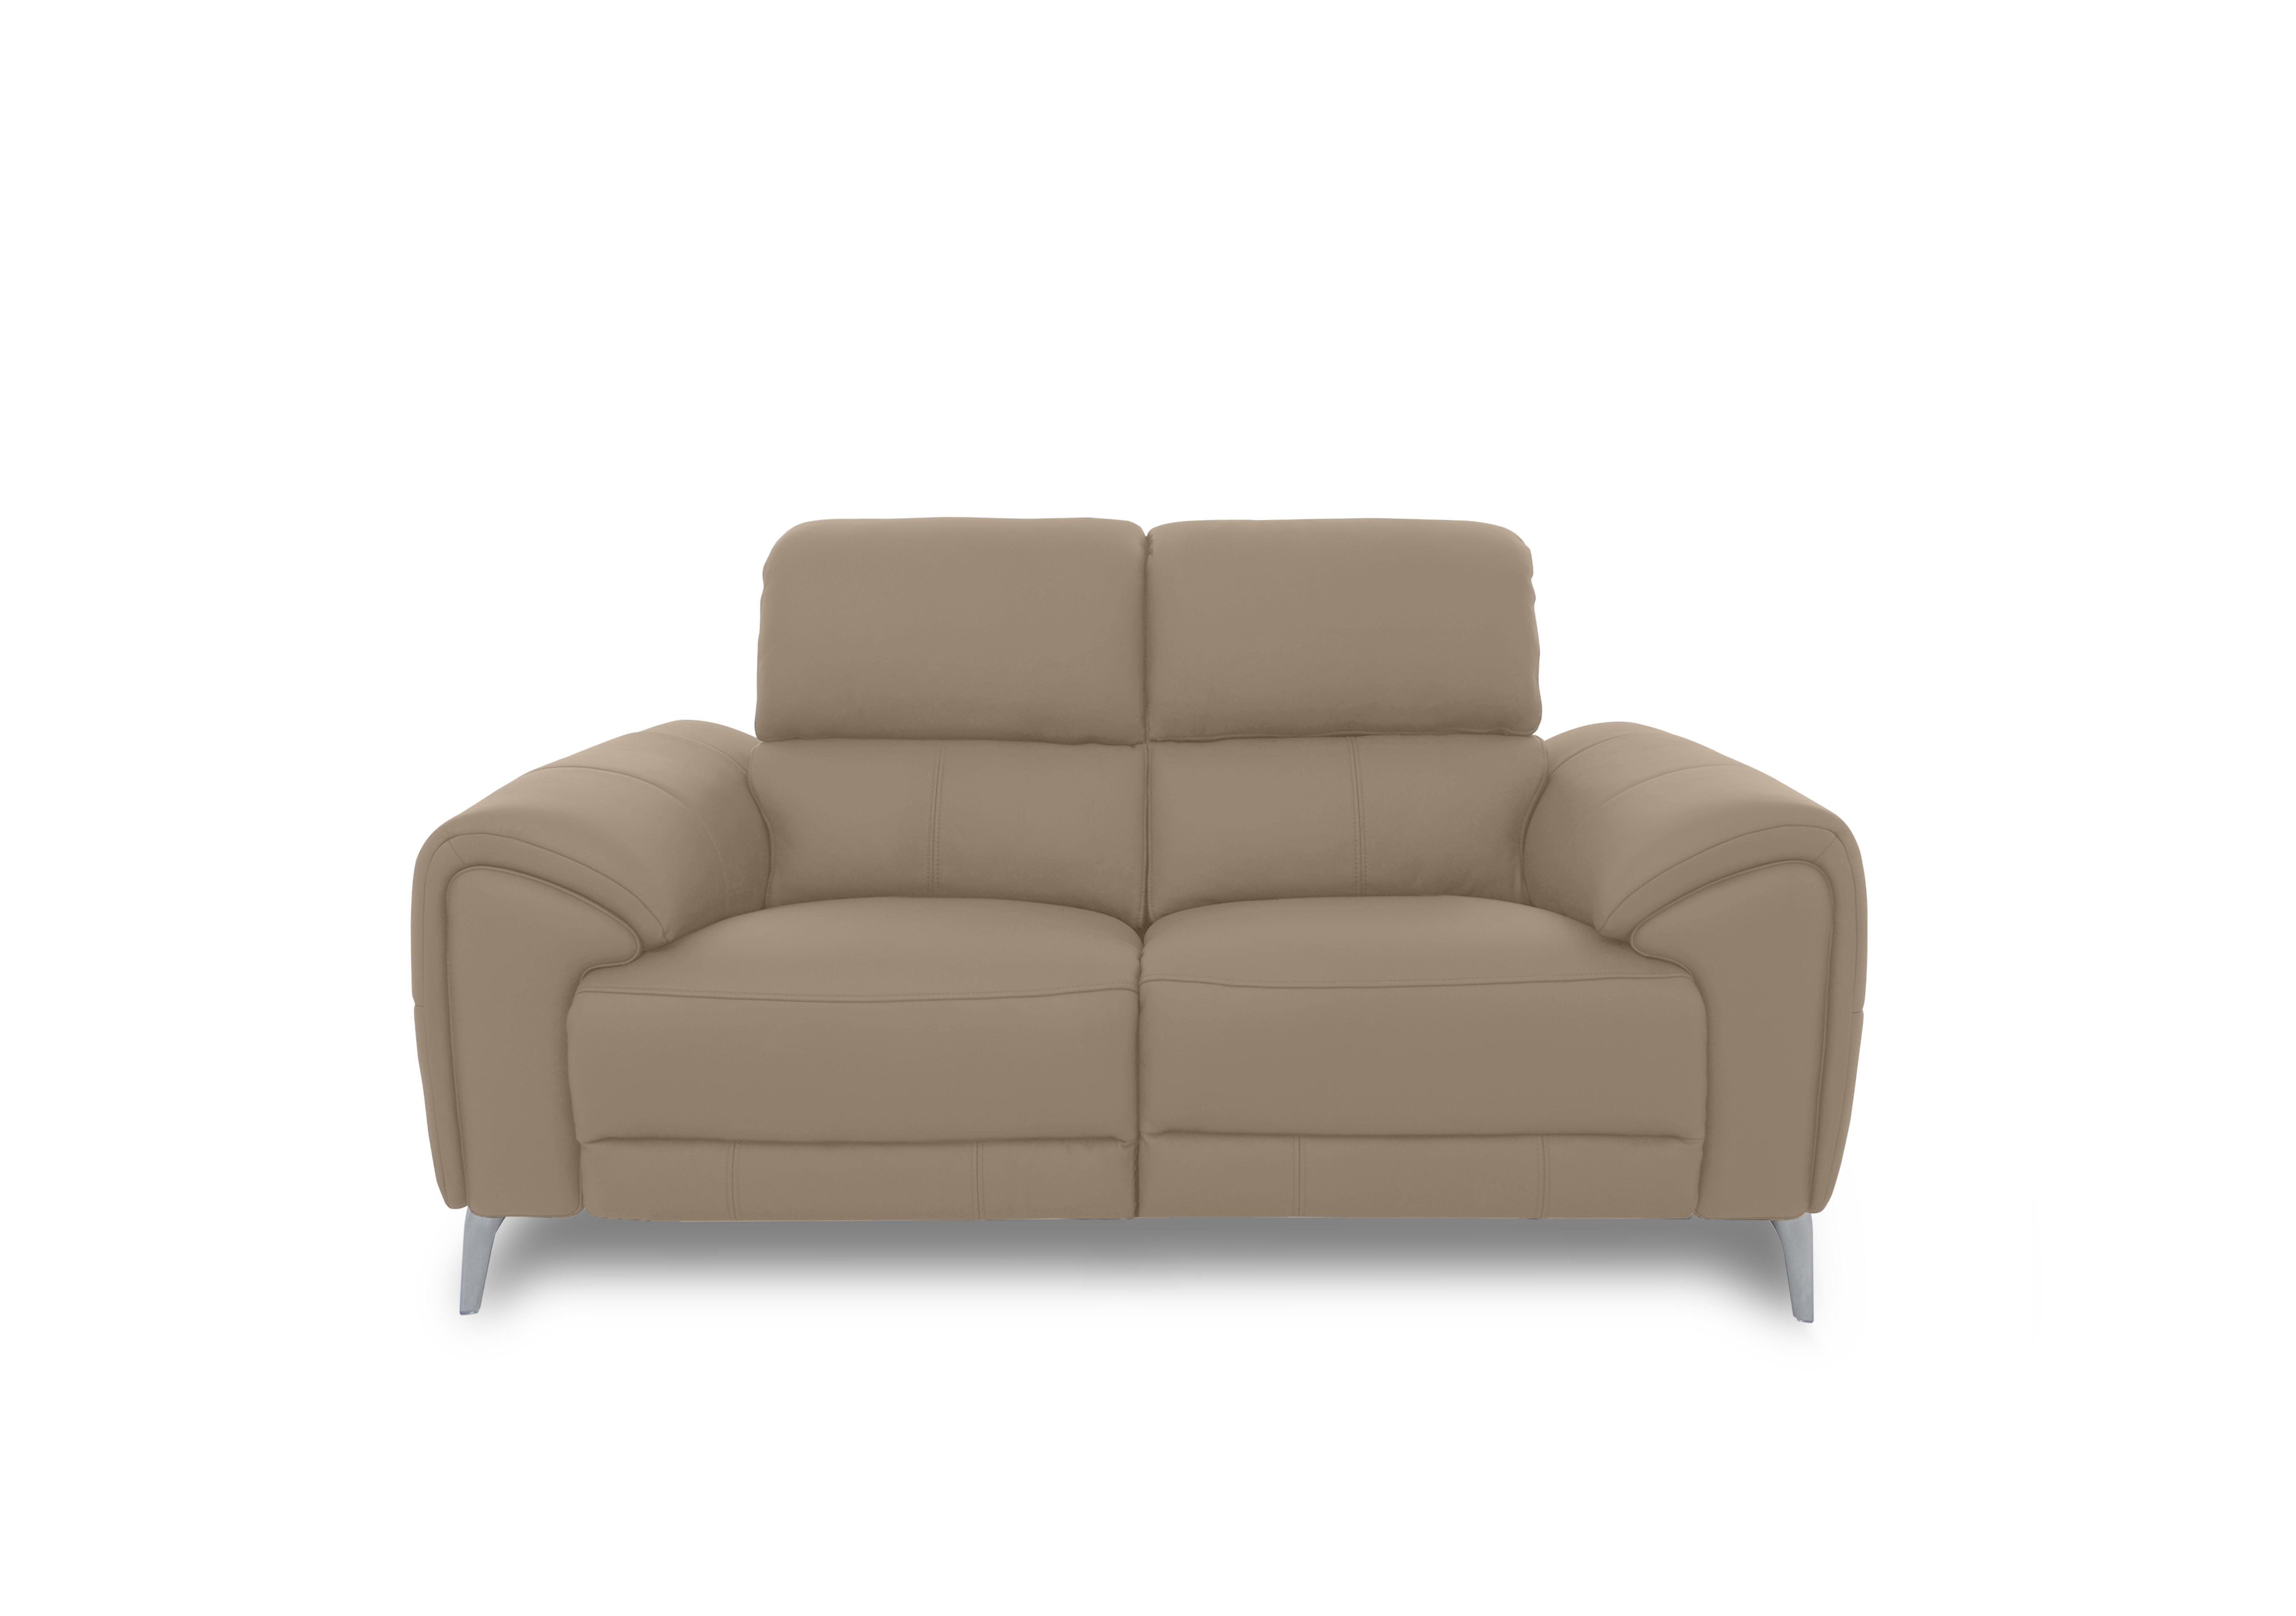 Vino Leather 2 Seater Power Recliner Sofa with Power Headrests and Heated Seats in Cat-60/06 Barley on Furniture Village